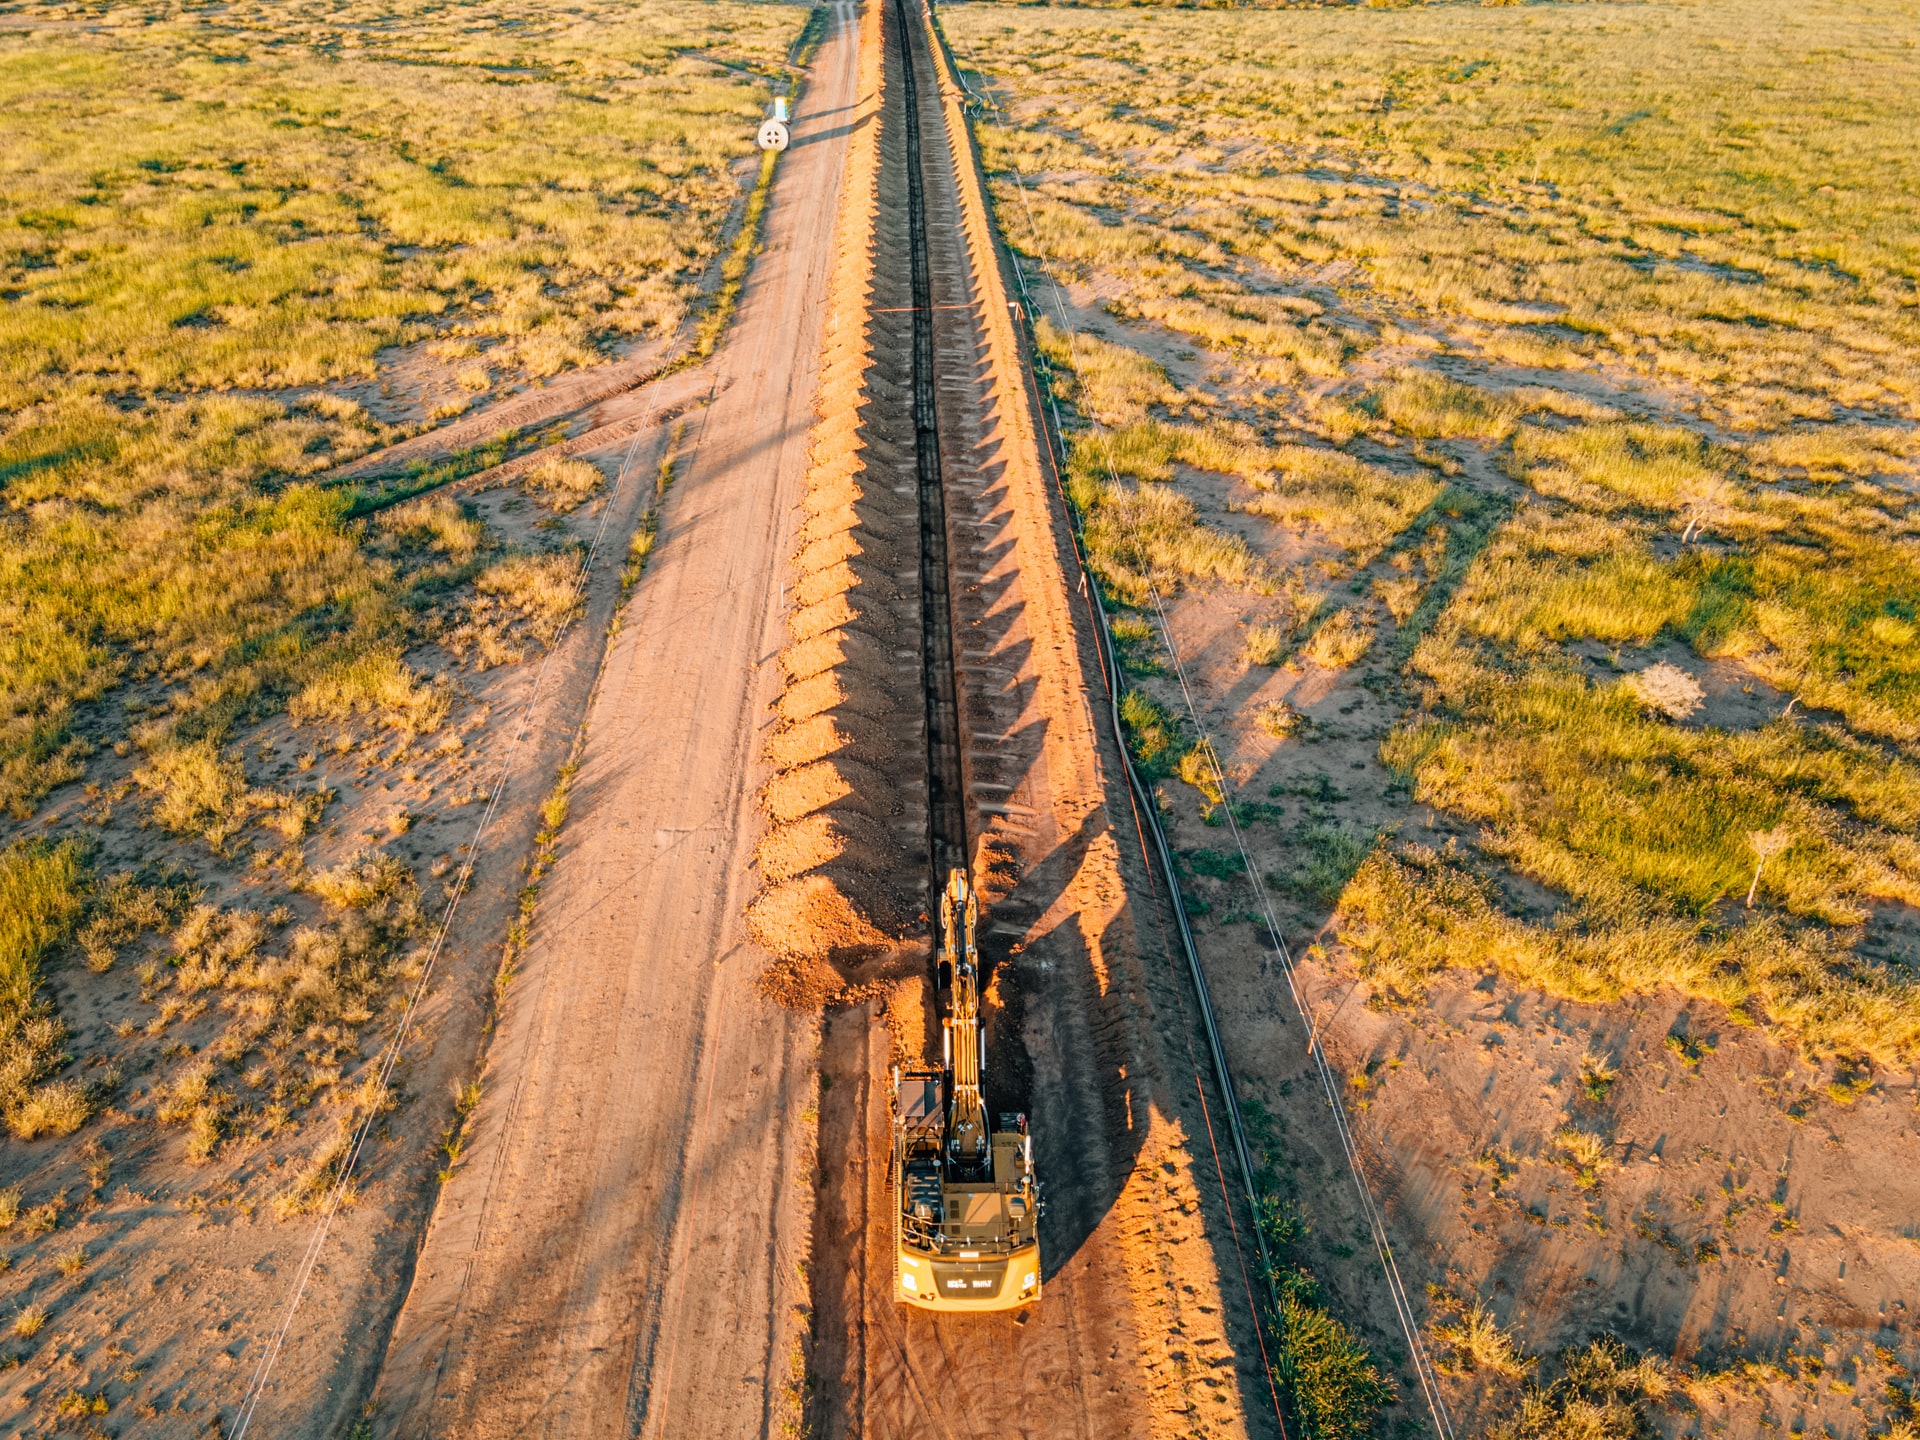 An autonomous excavator prepares trenches for an oil pipeline installation in Queensland, Australia